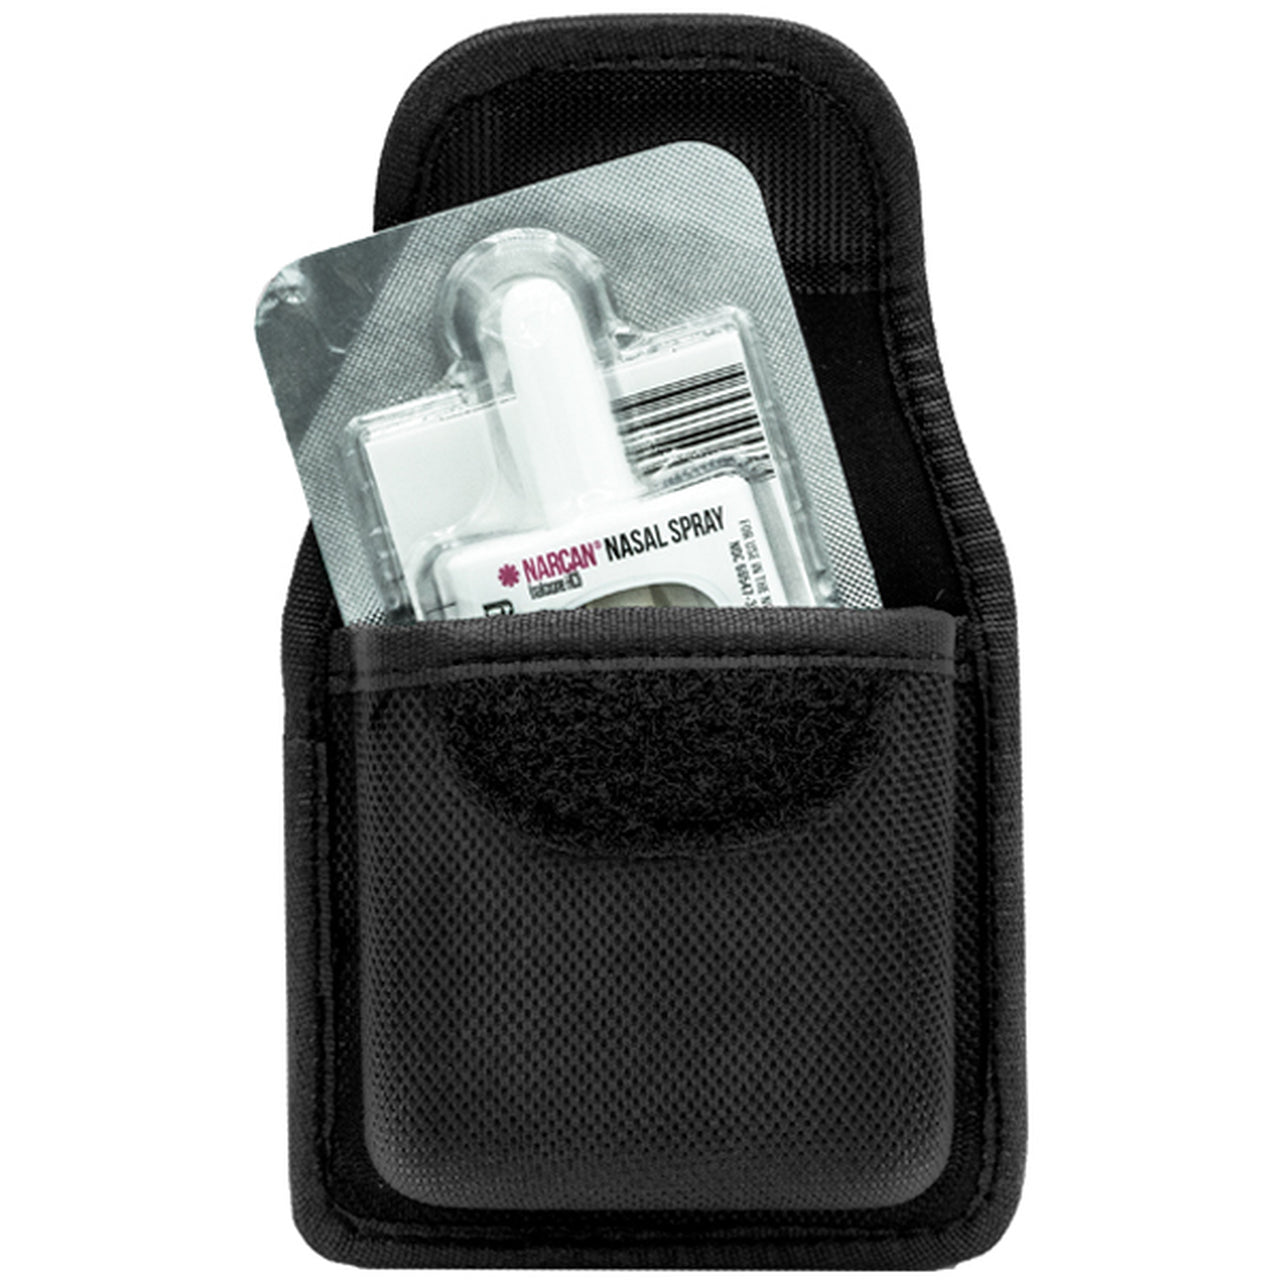 Ballistic Narcan® Nasal Spray Case (Fits up to 2.25" belt)